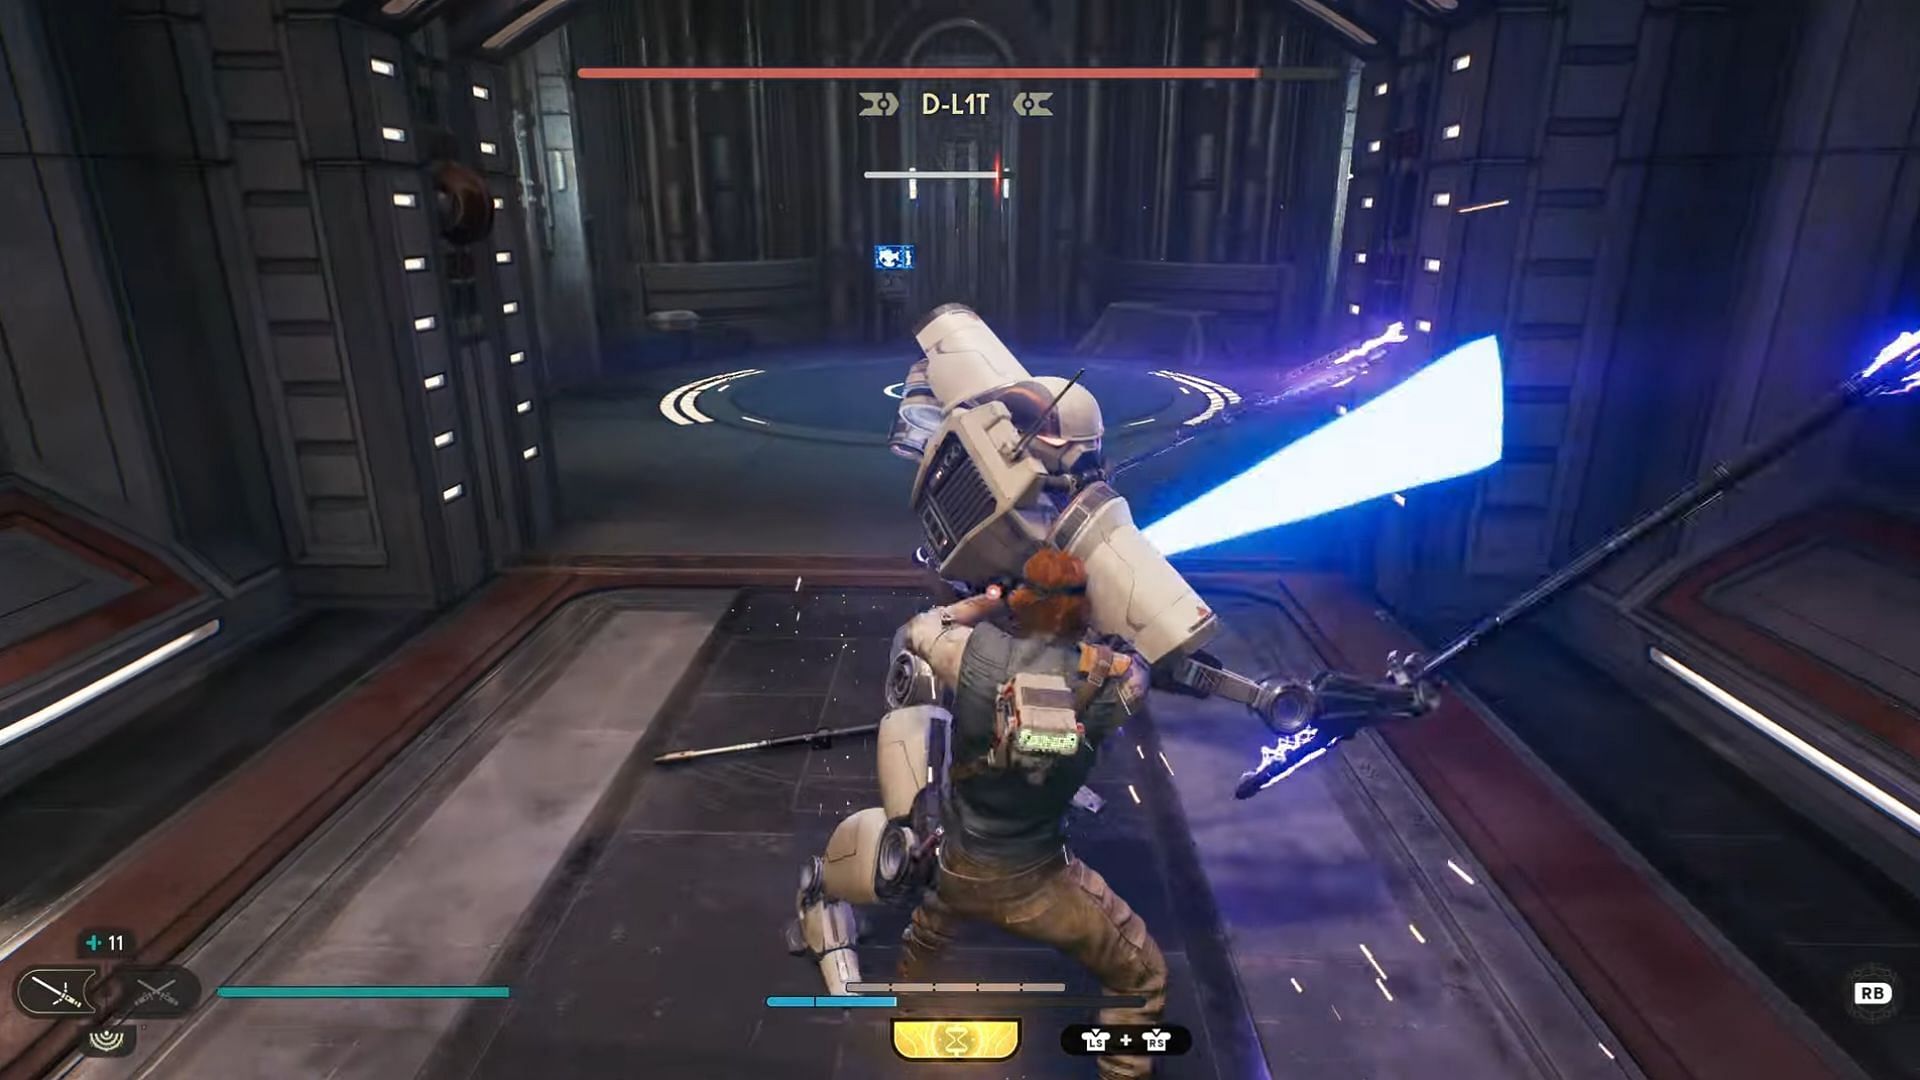 Its primary attack includes a simple weapon swing (Image via Electronic Arts)